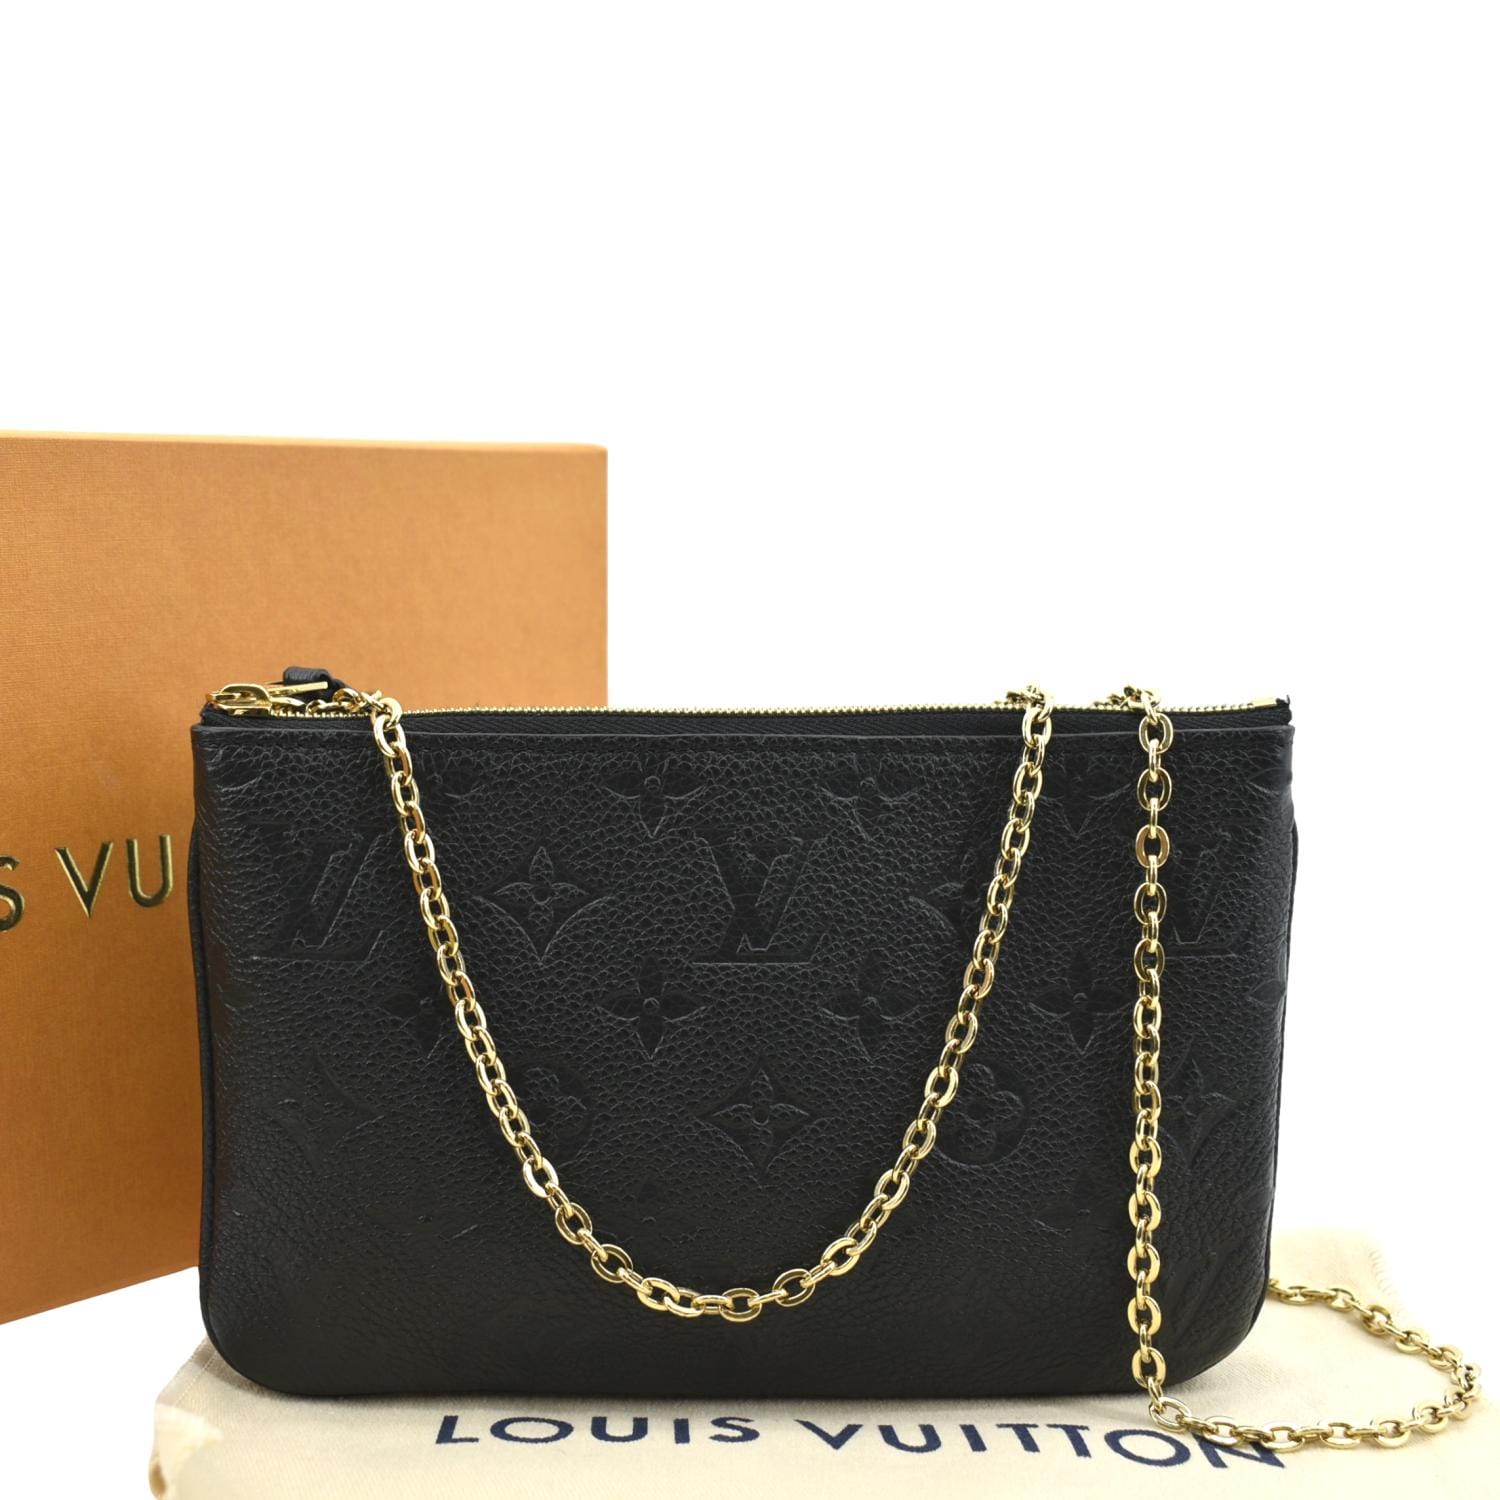 What Fits inside of the Louis Vuitton Double Zip Pochette?? 